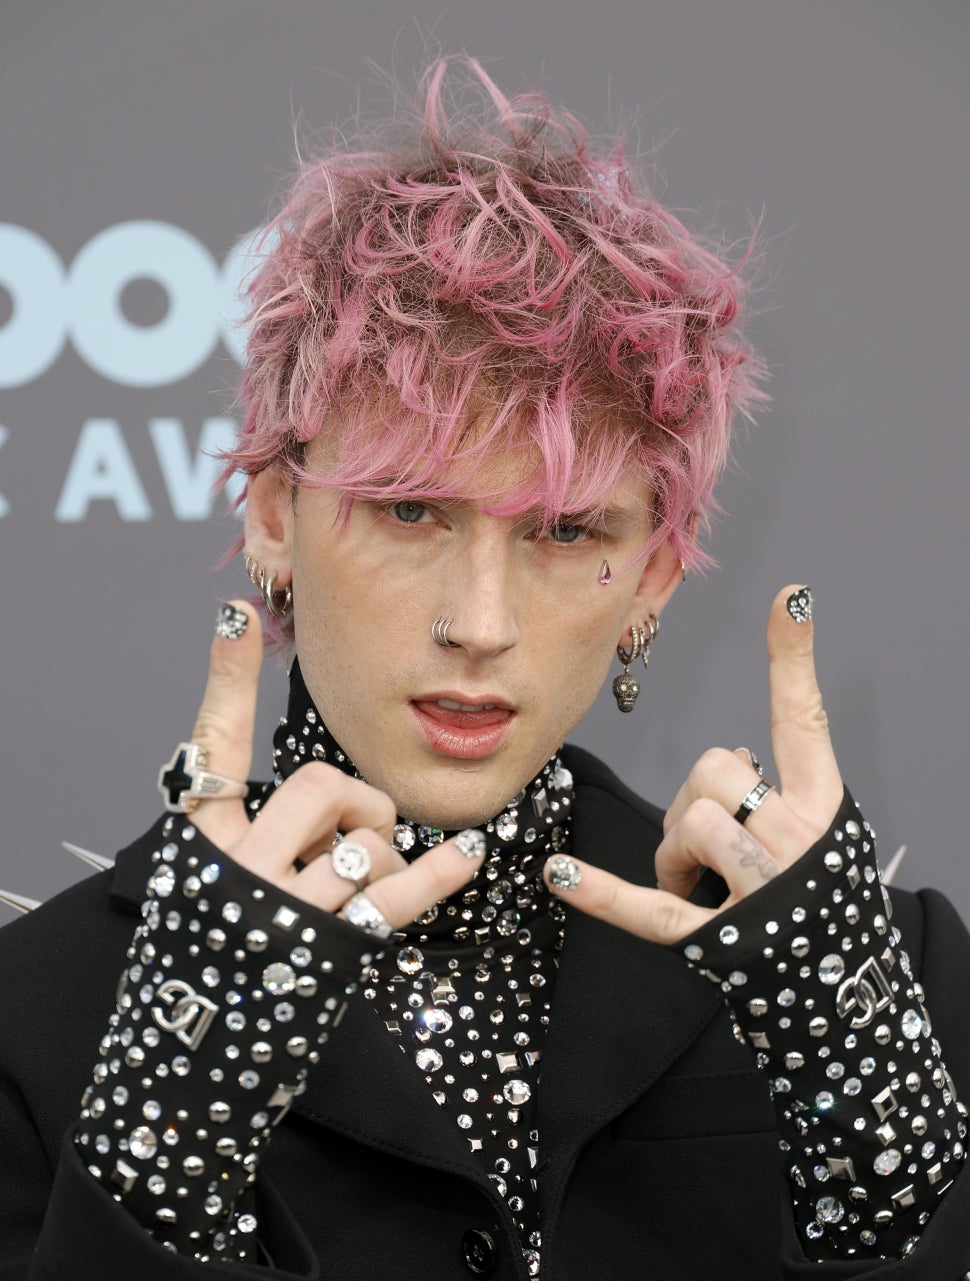 Machine Gun Kelly attends the 2022 Billboard Music Awards at MGM Grand Garden Arena on May 15, 2022 in Las Vegas, Nevada.